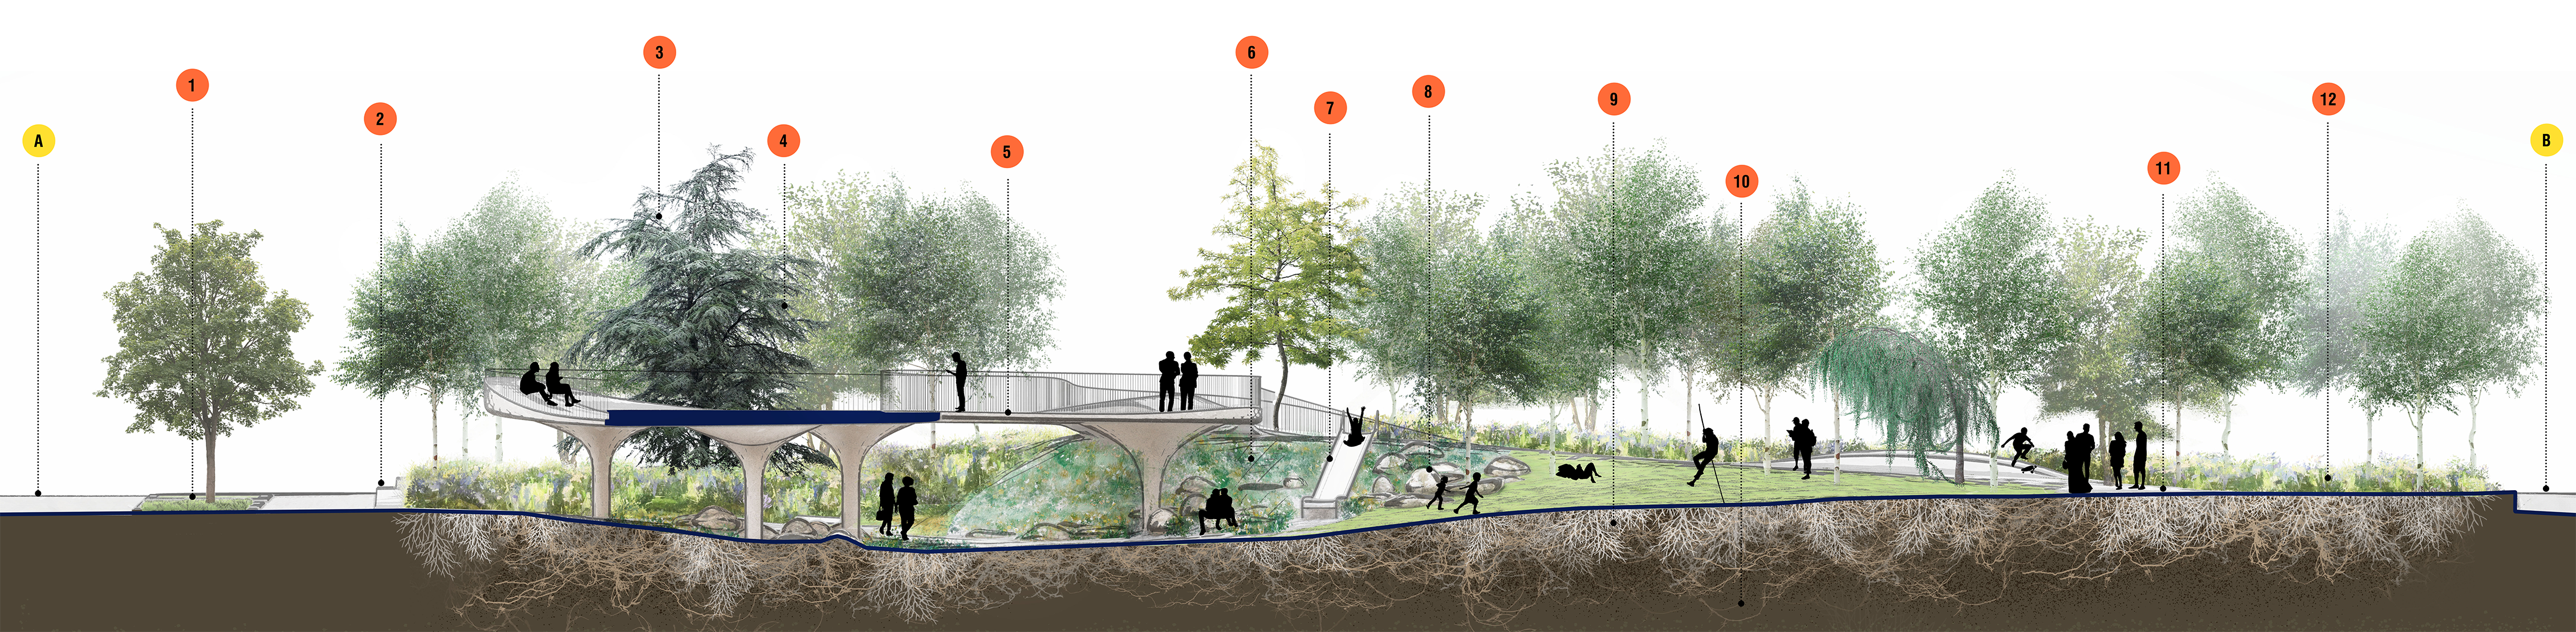 Cut-through section of the park, aligned North-South and looking West. The image shows the soil conditions below the ground and groves of grey and yellow birch trees. The image highlights Wàwàtesí’s sustainability components. From left to right, they are: bioretention planters and green stormwater infrastructure on Nelson street; low walls designed to be used as benches made from reclaimed and repurposed building demolition waste; the firefly habitat, a natural planting area within the groves of trees; groves of grey and yellow birch trees planted when very young to encourage natural forest-like health; the Canvas and Balcony structure made of low-carbon concrete; the rocky fern garden and its biodiversity elements; the Riverbed Playscape’s recycled-steel slide; salvaged boulders from quarry waste; healthy root systems from the groves’ planting techniques; healthy soil with mycelium (mushroom roots) and probiotic activity; concrete pavers made from carbon-negative concrete; and low-maintenance native plants beneath the birch groves. 